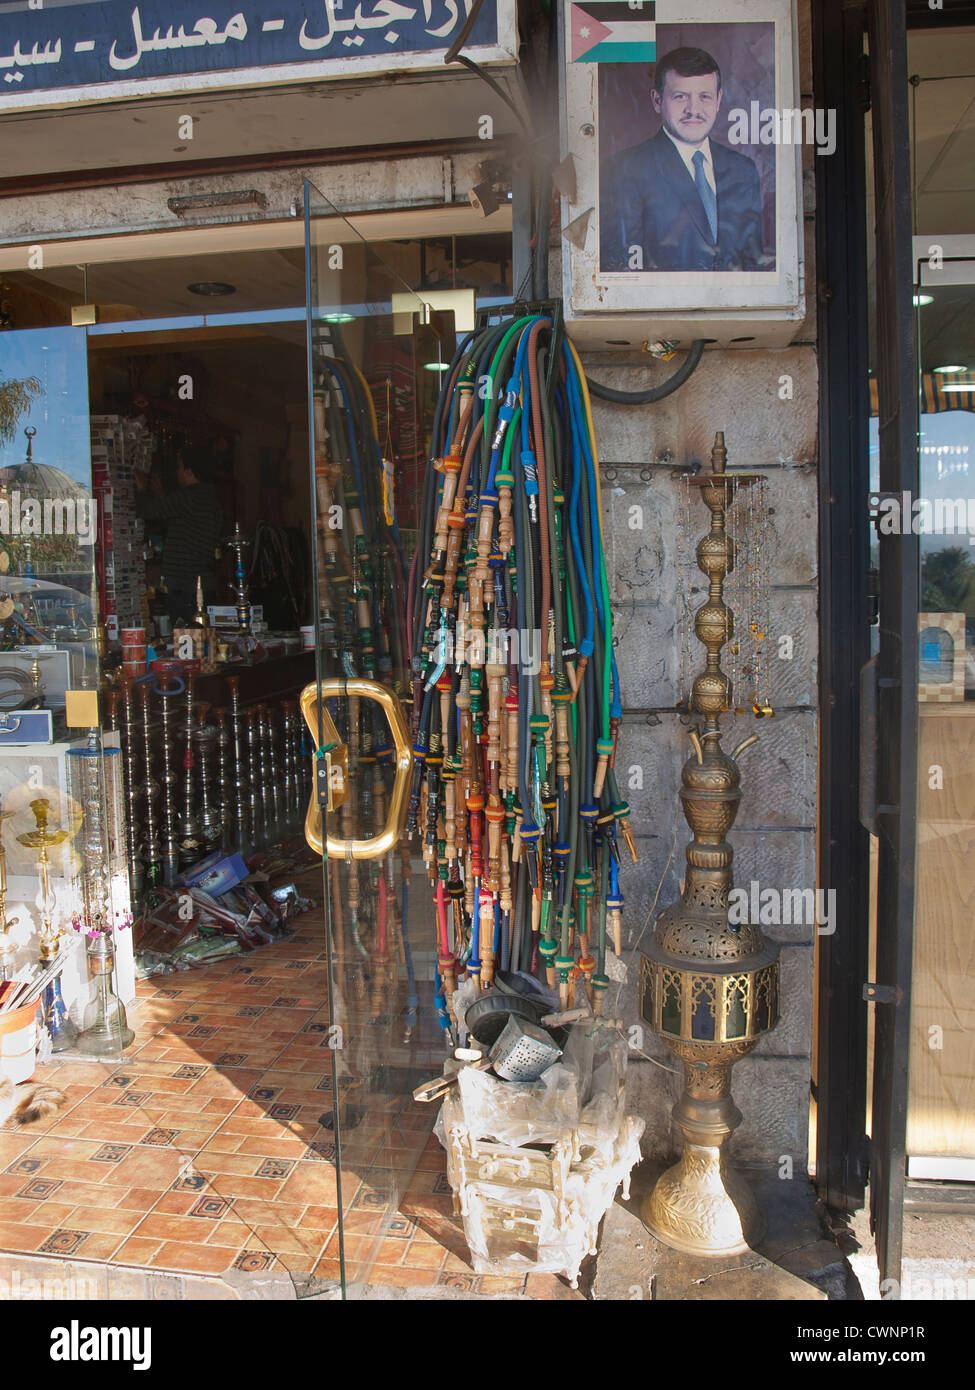 Waterpipe or narghile is in frequent use in Aqaba Jordan. Her a shop displaying mouthpieces and the kings portrait Stock Photo